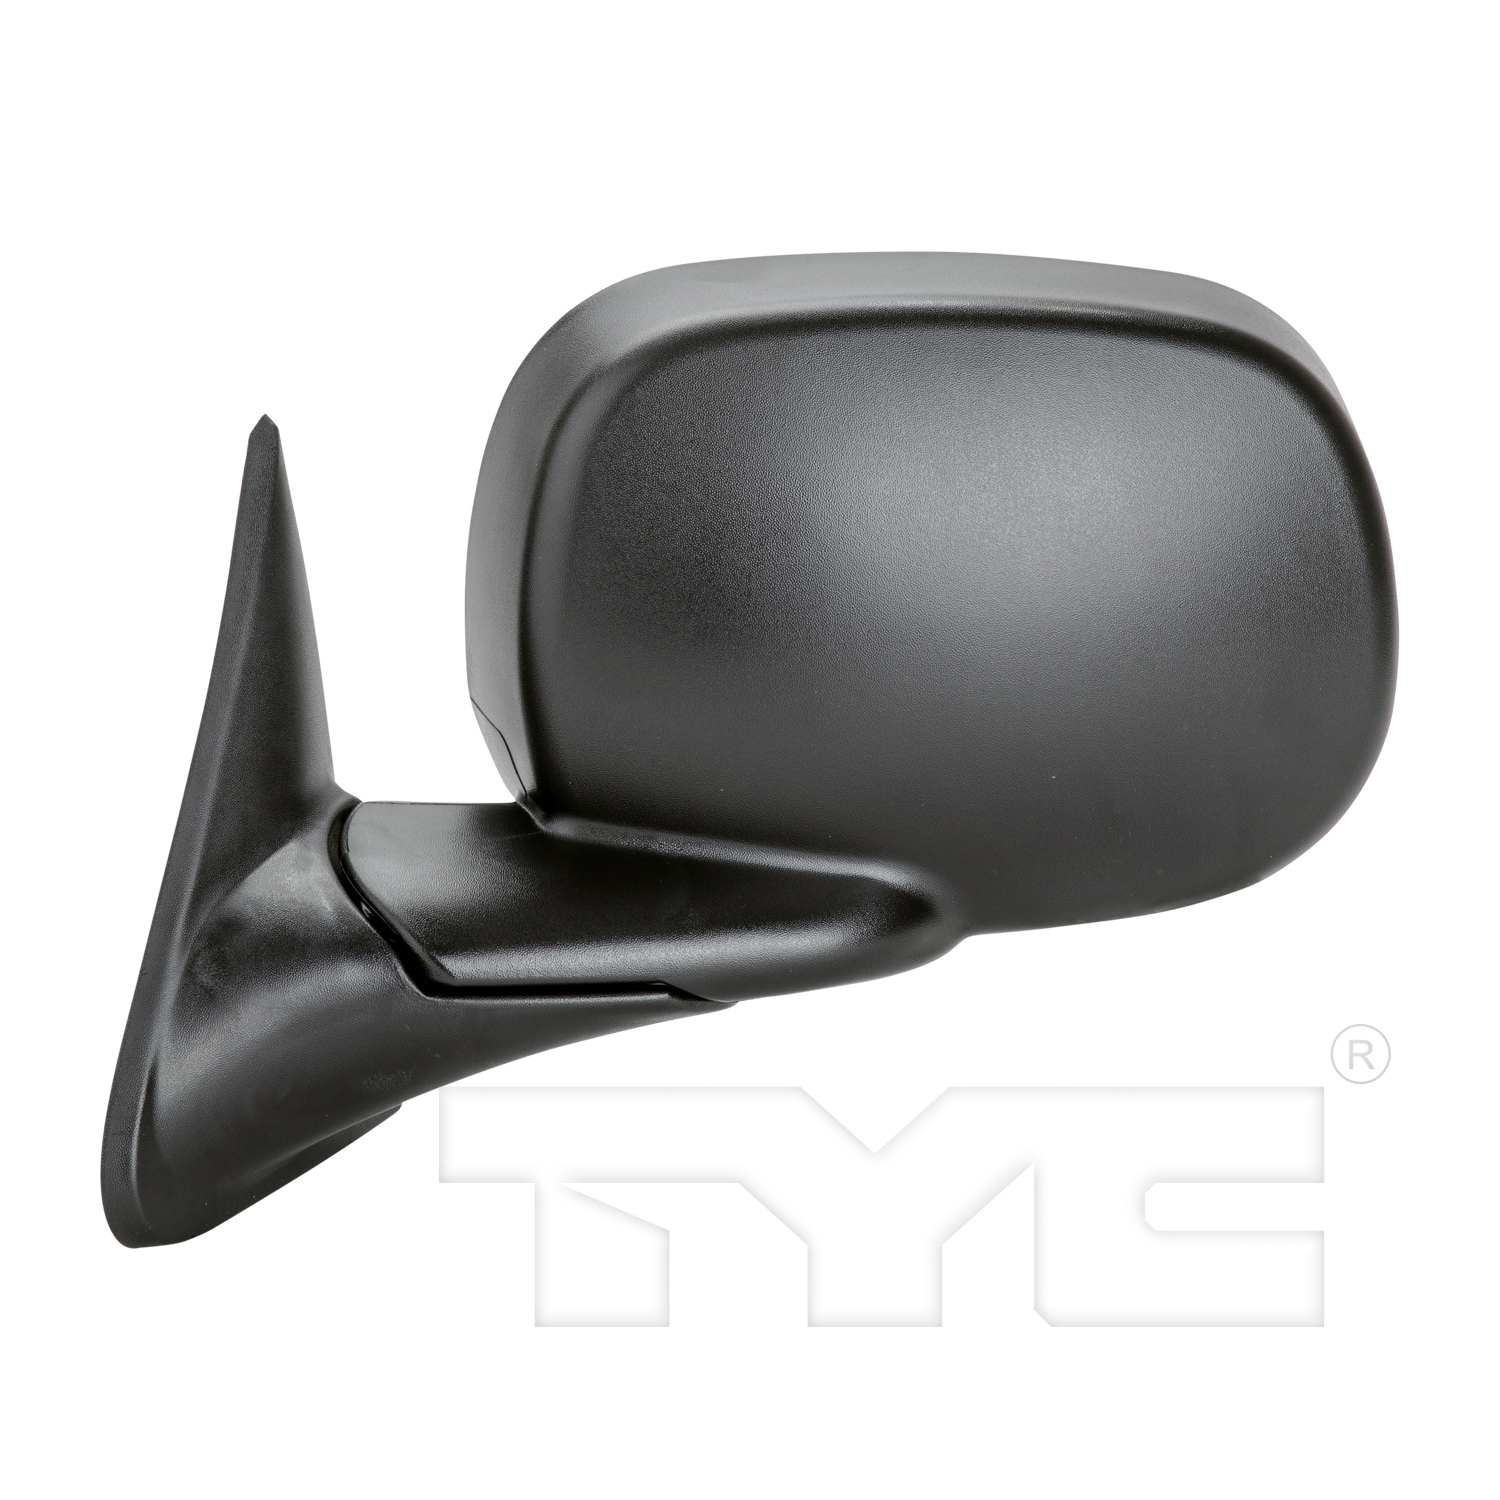 Aftermarket MIRRORS for DODGE - RAM 2500, RAM 2500,98-00,LT Mirror outside rear view